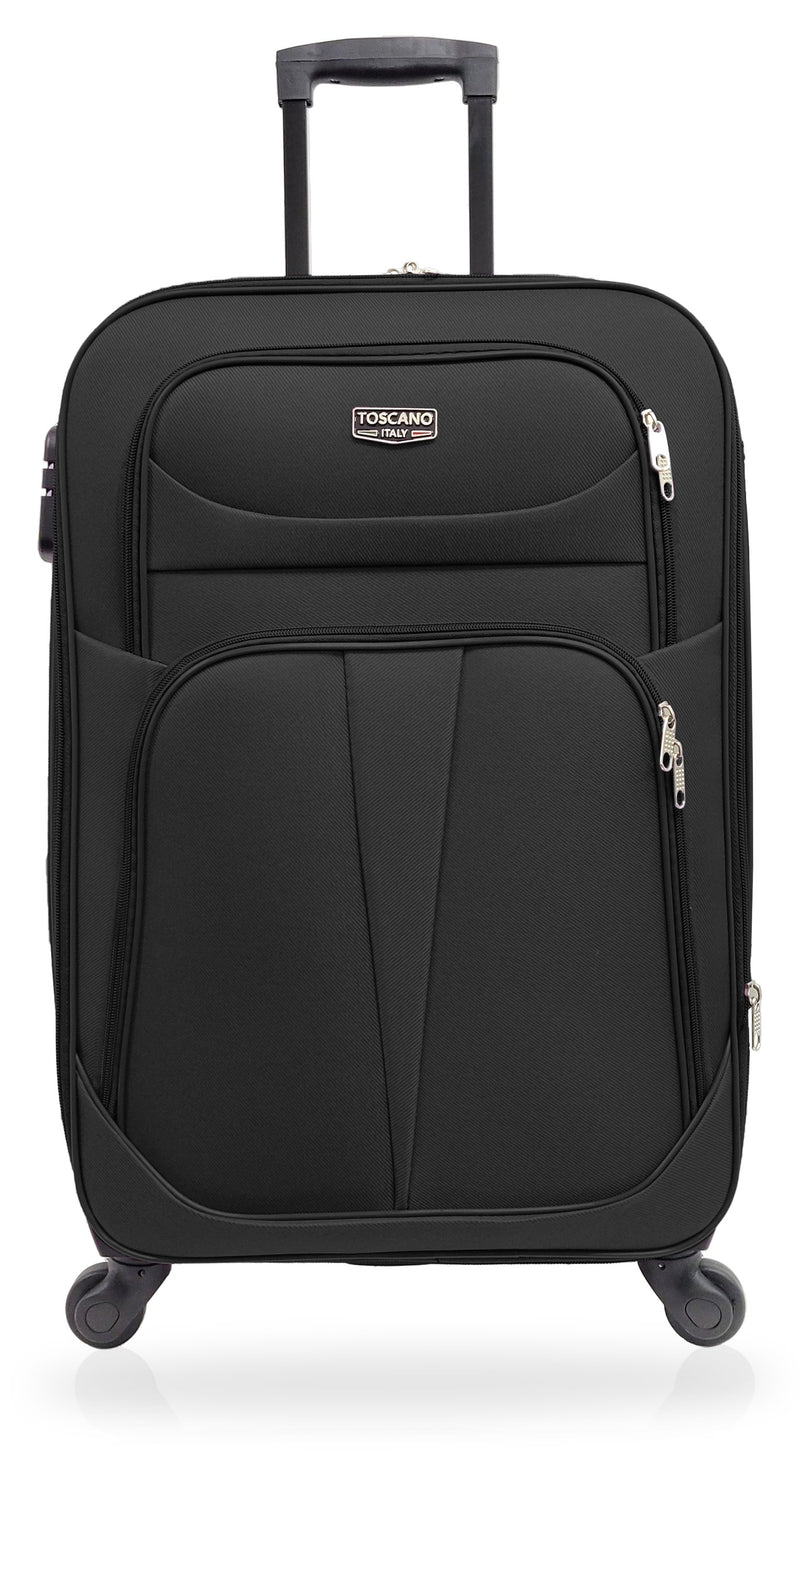 TOSCANO by Tucci 20-inch Parata Carry On Lightweight Luggage Suitcase